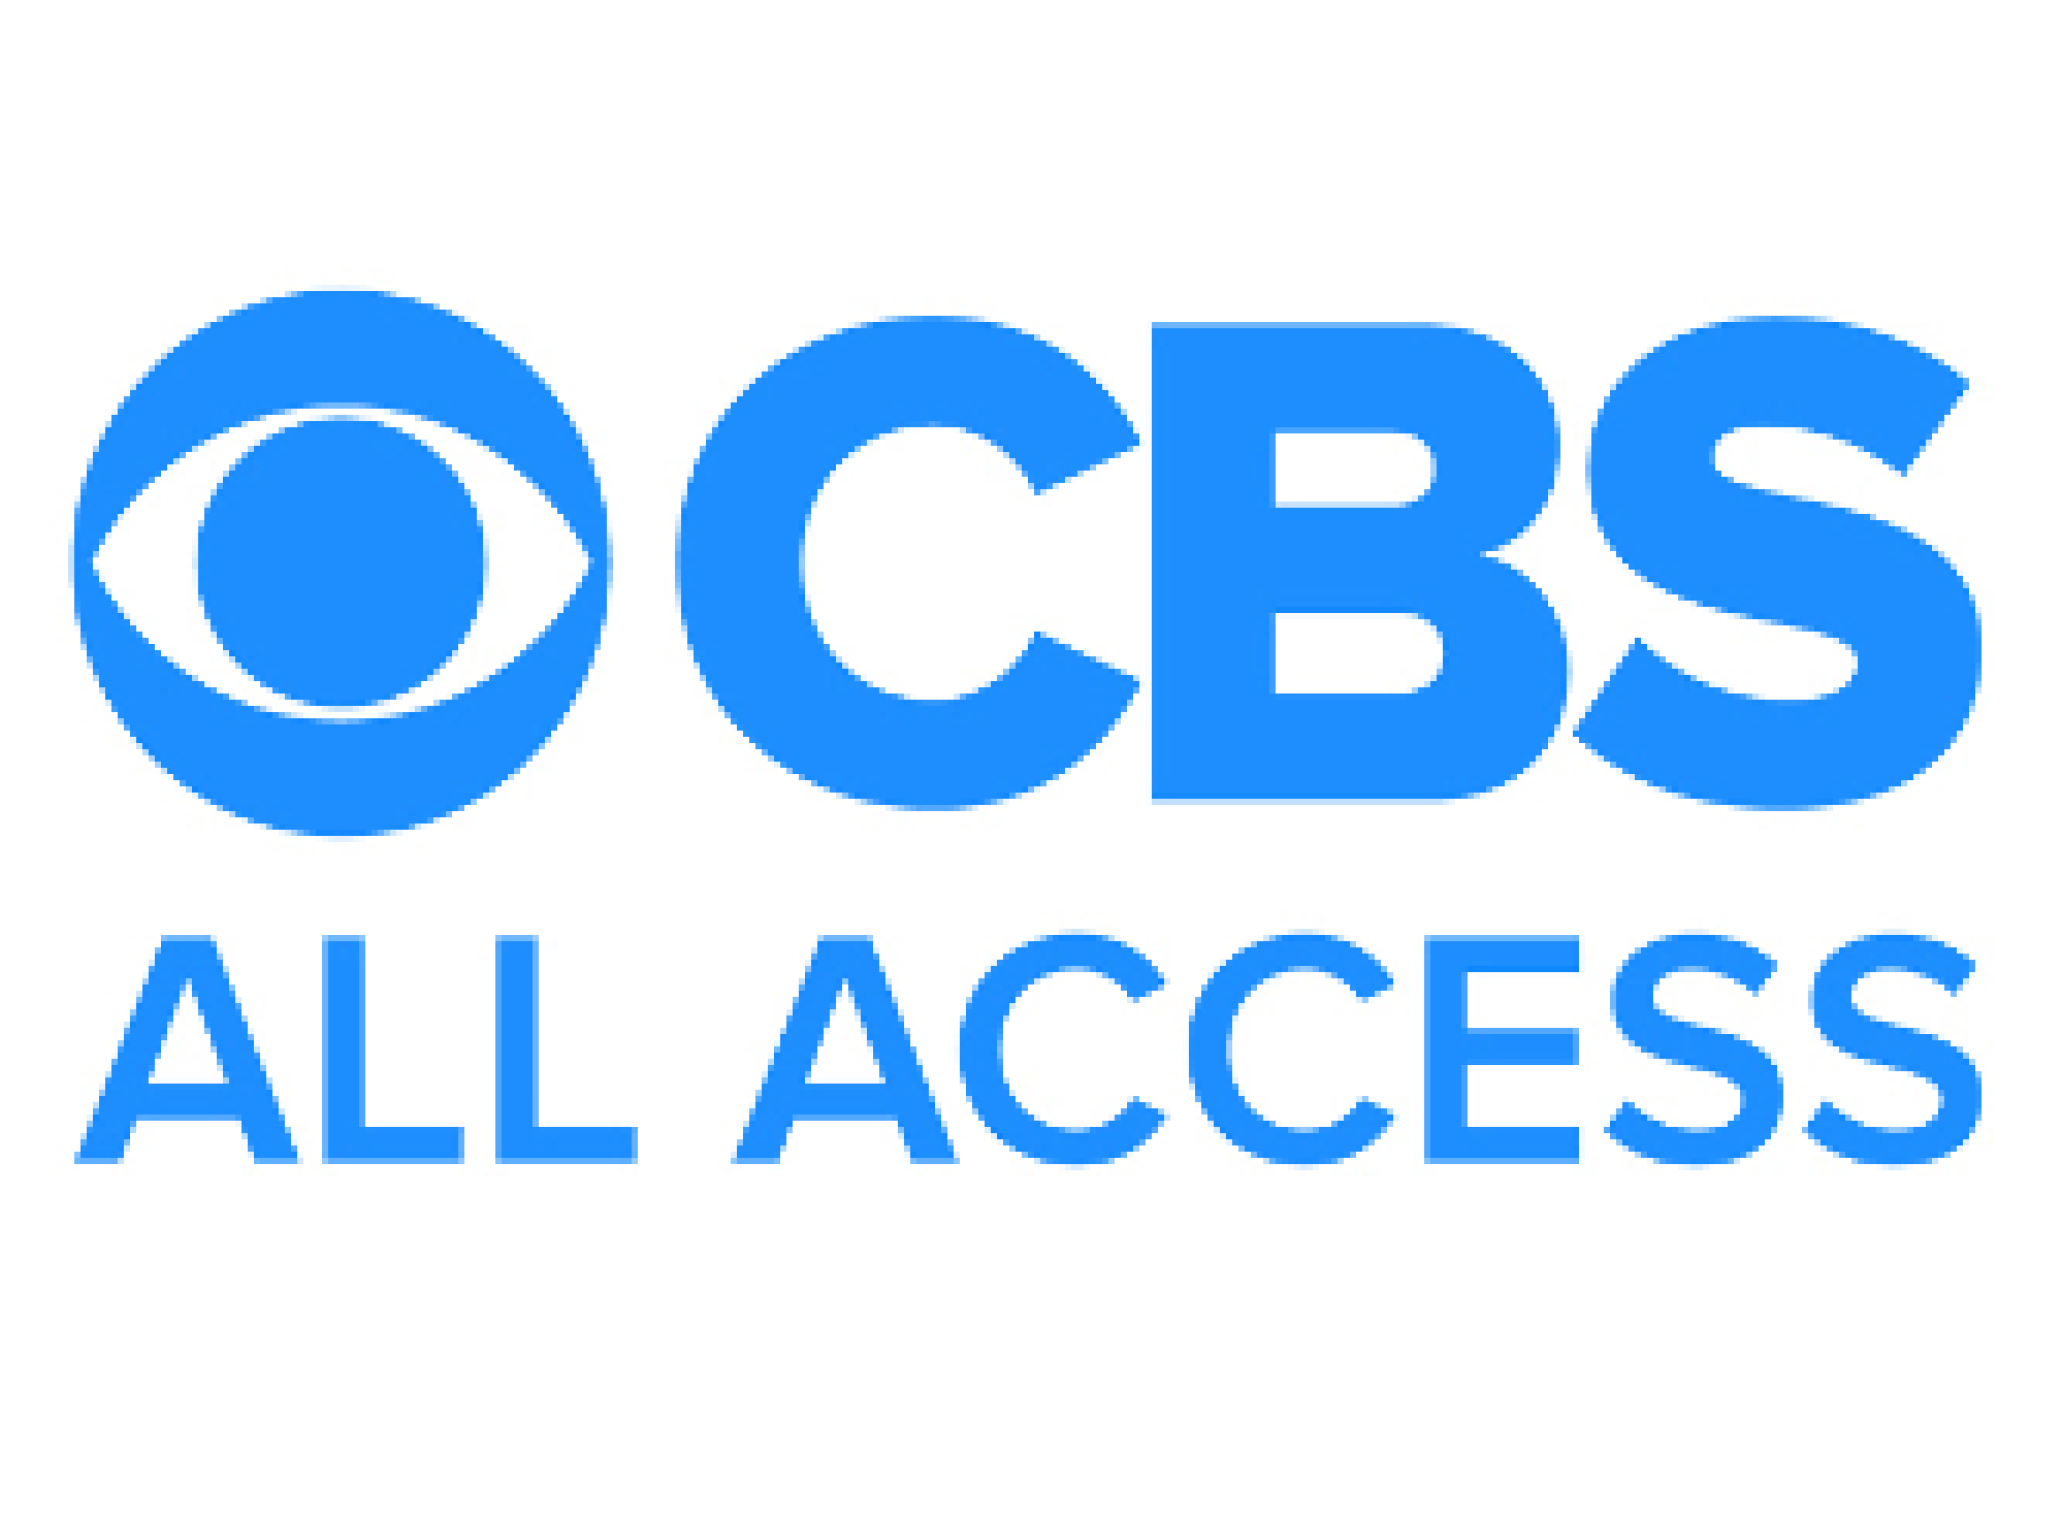 Hate CBS All Access? New ViacomCBS Service May Help Remedy That